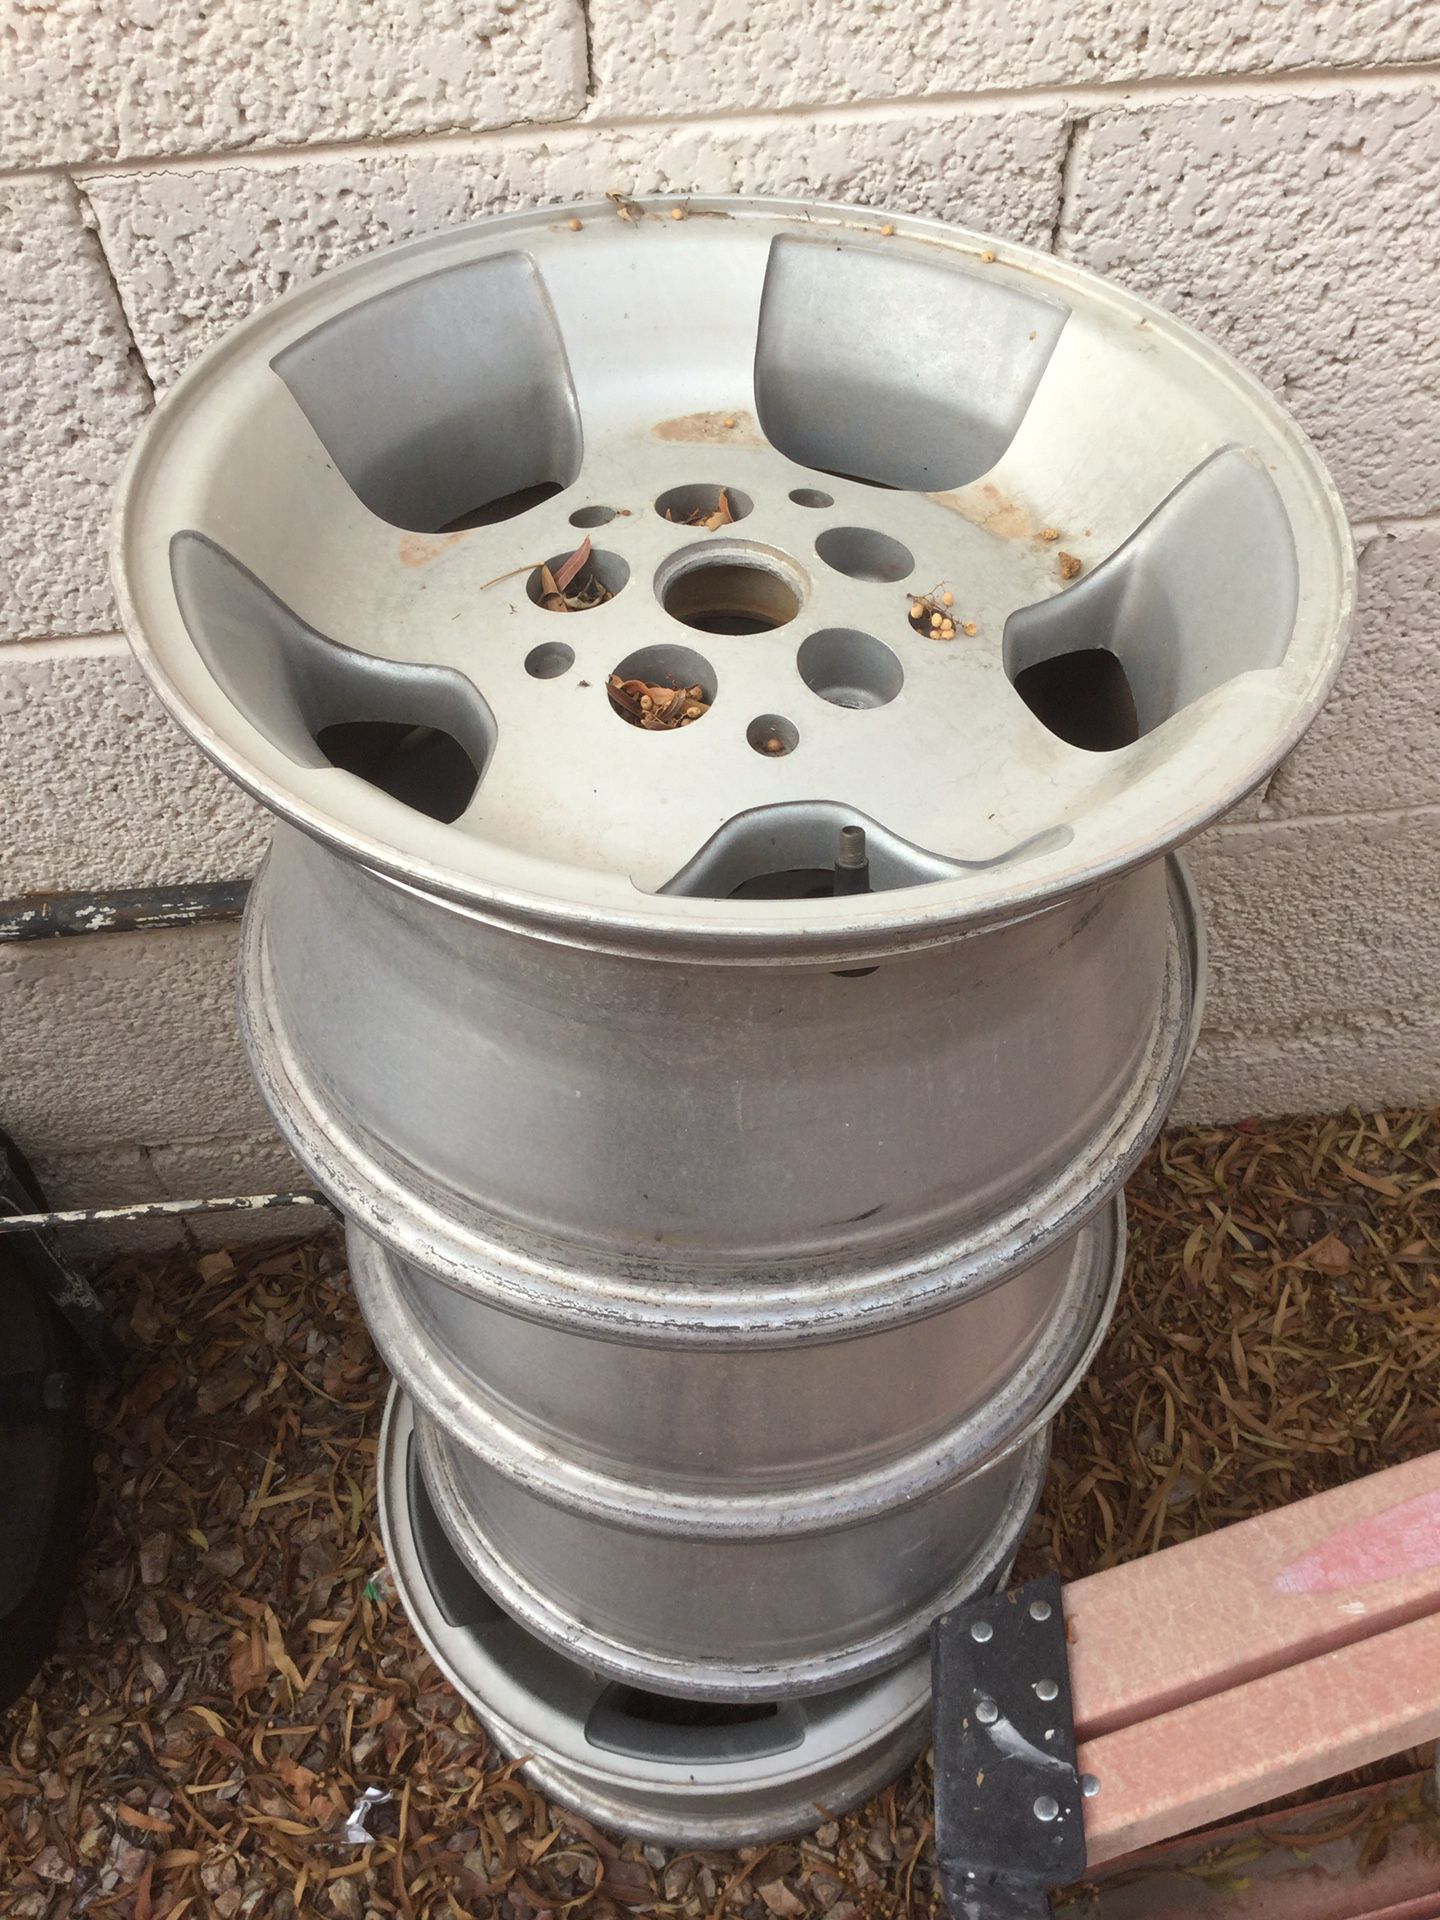 Free Jeep Rims, good shape just dirty! Not sure of size, aluminum